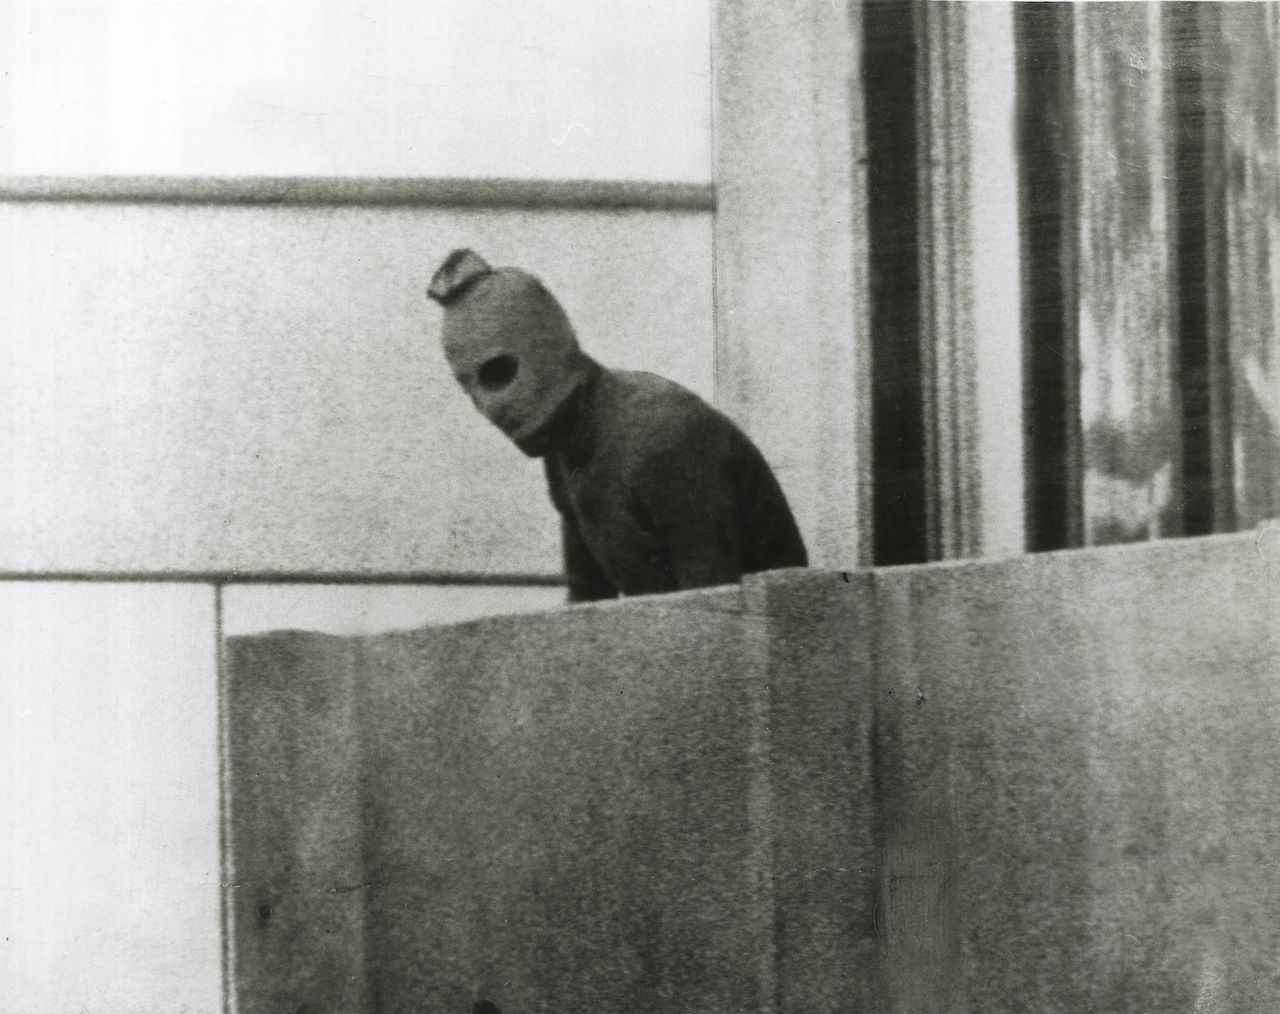 A Palestinian terrorist peers over the balcony of a room in the Olympic Village, where Israeli athletes were being held hostage, in Munich on Sept. 5, 1972.